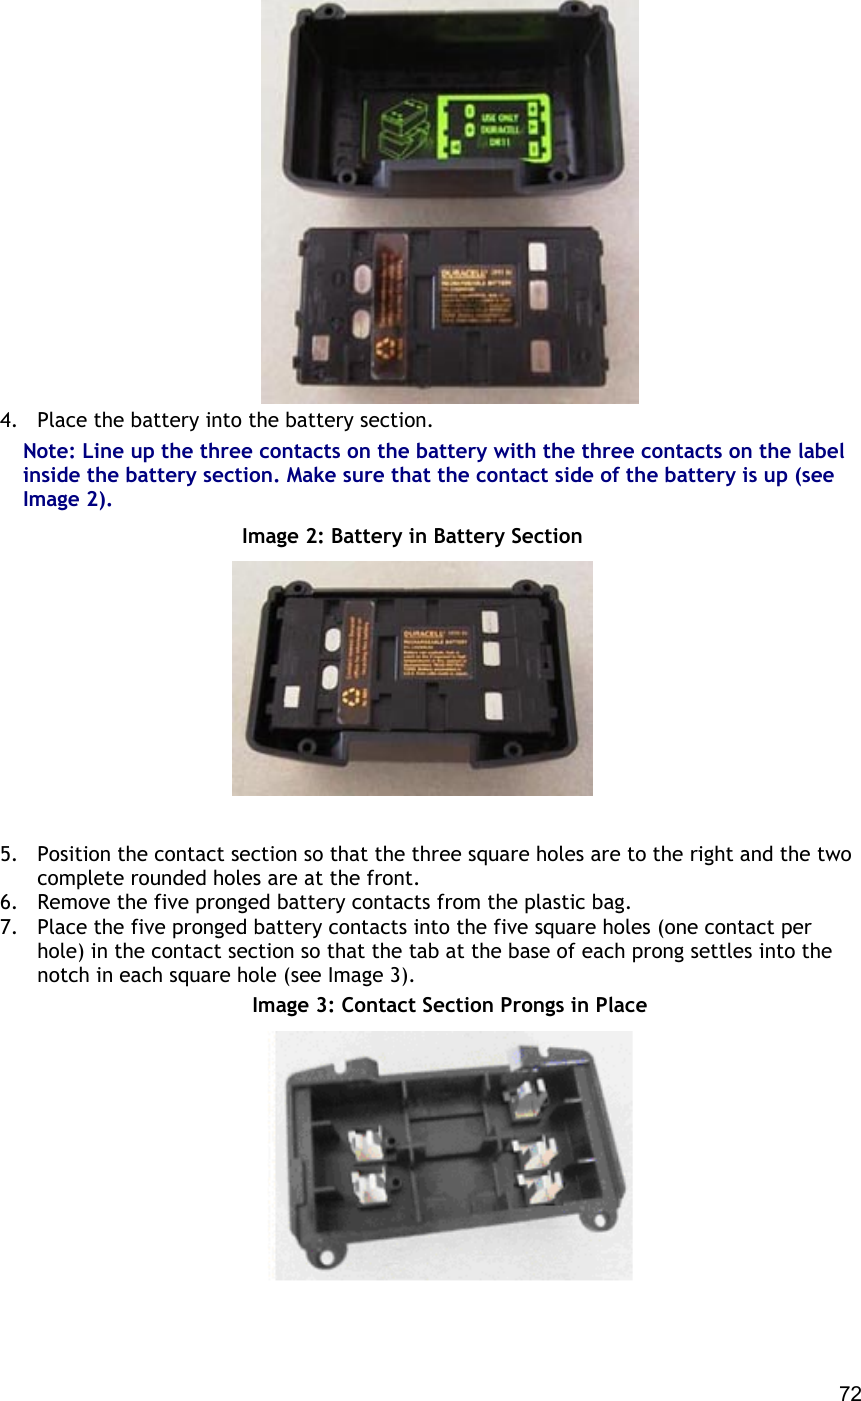  72  4.  Place the battery into the battery section. Note: Line up the three contacts on the battery with the three contacts on the label inside the battery section. Make sure that the contact side of the battery is up (see Image 2).  Image 2: Battery in Battery Section    5.  Position the contact section so that the three square holes are to the right and the two complete rounded holes are at the front. 6.  Remove the five pronged battery contacts from the plastic bag. 7.  Place the five pronged battery contacts into the five square holes (one contact per hole) in the contact section so that the tab at the base of each prong settles into the notch in each square hole (see Image 3).  Image 3: Contact Section Prongs in Place  